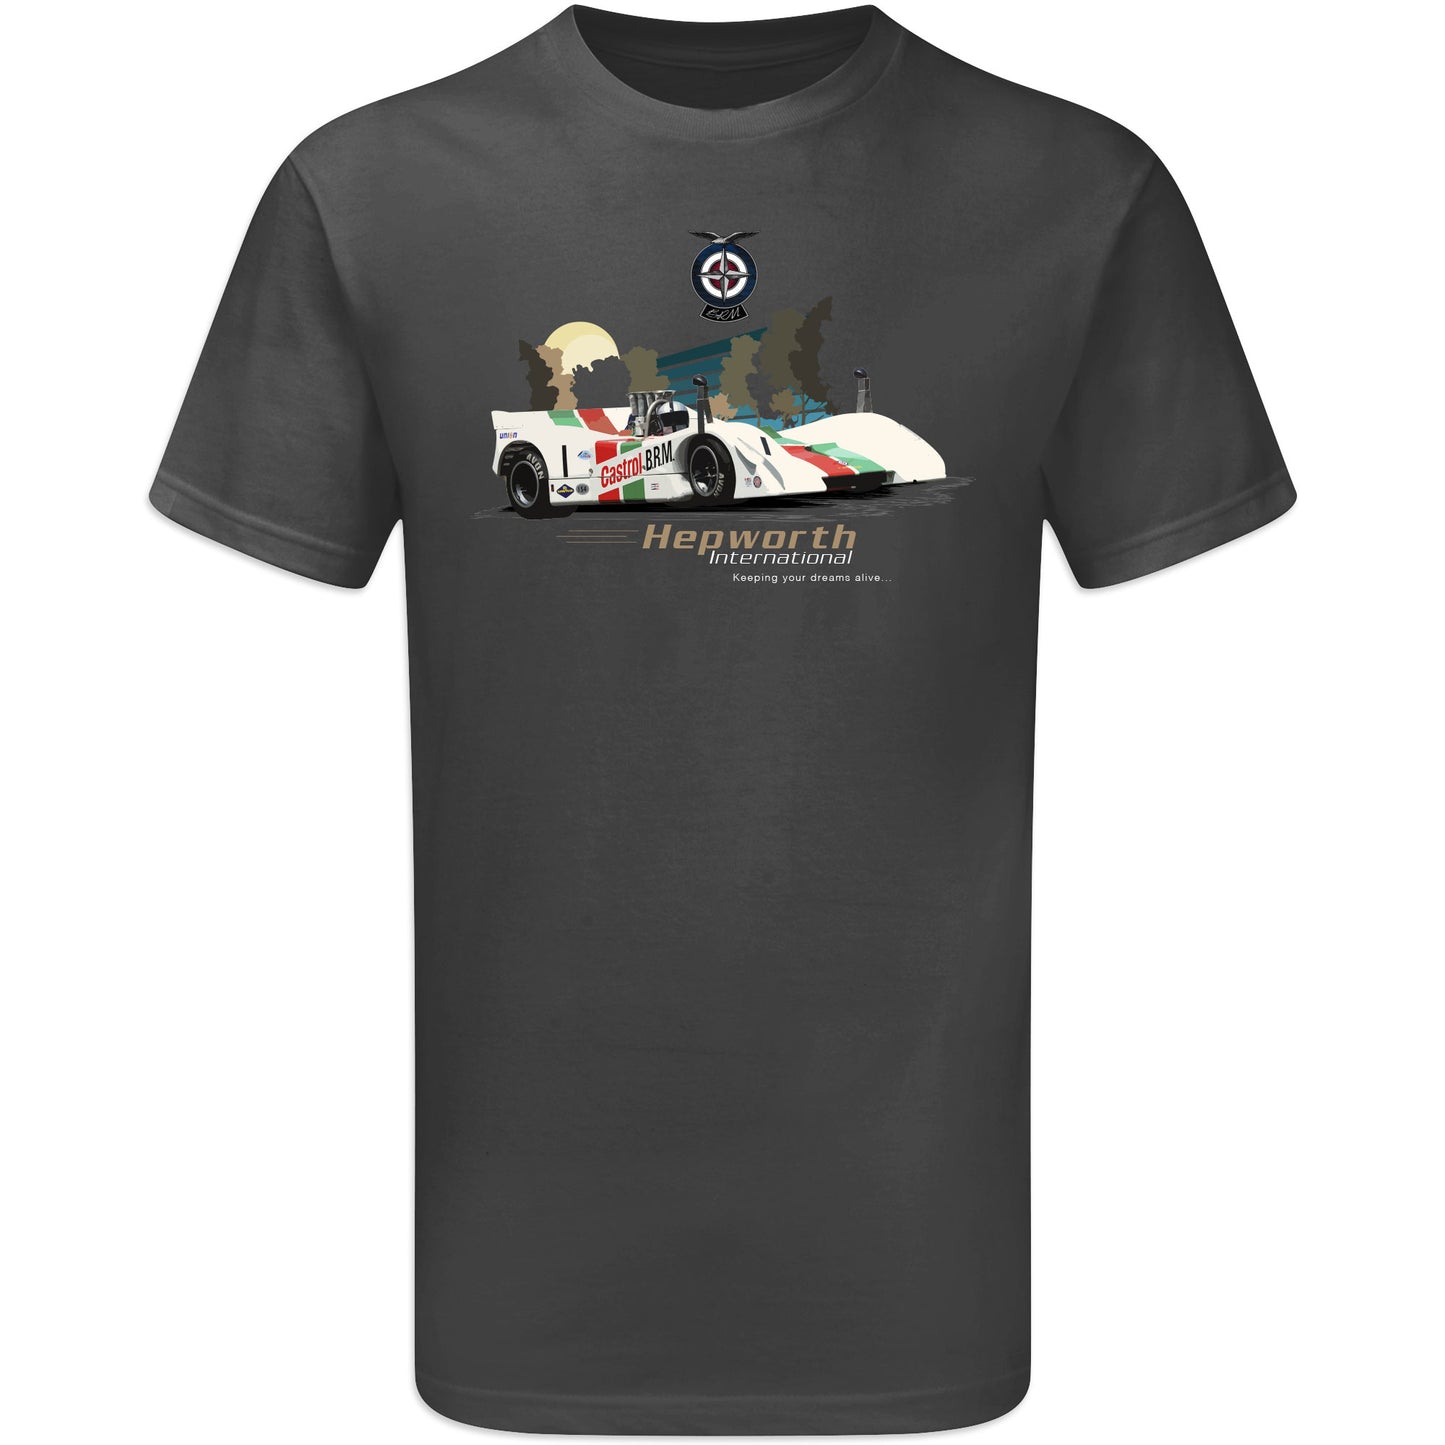 BRM P154 Can-Am Hepworth T-Shirt